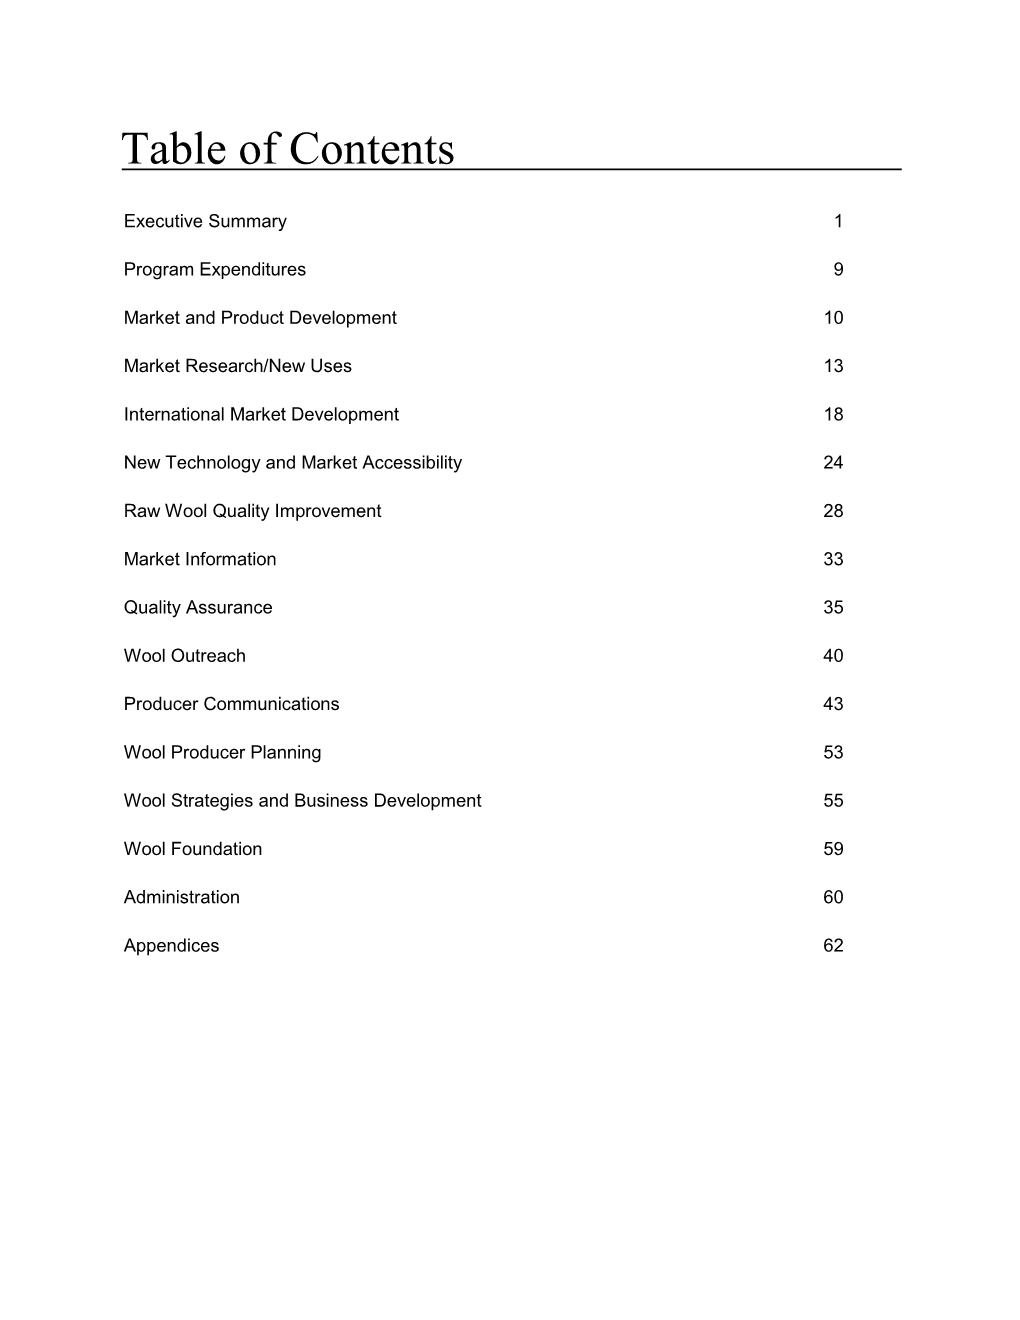 Table of Contents Executive Summary 1 Program Expenditures 9